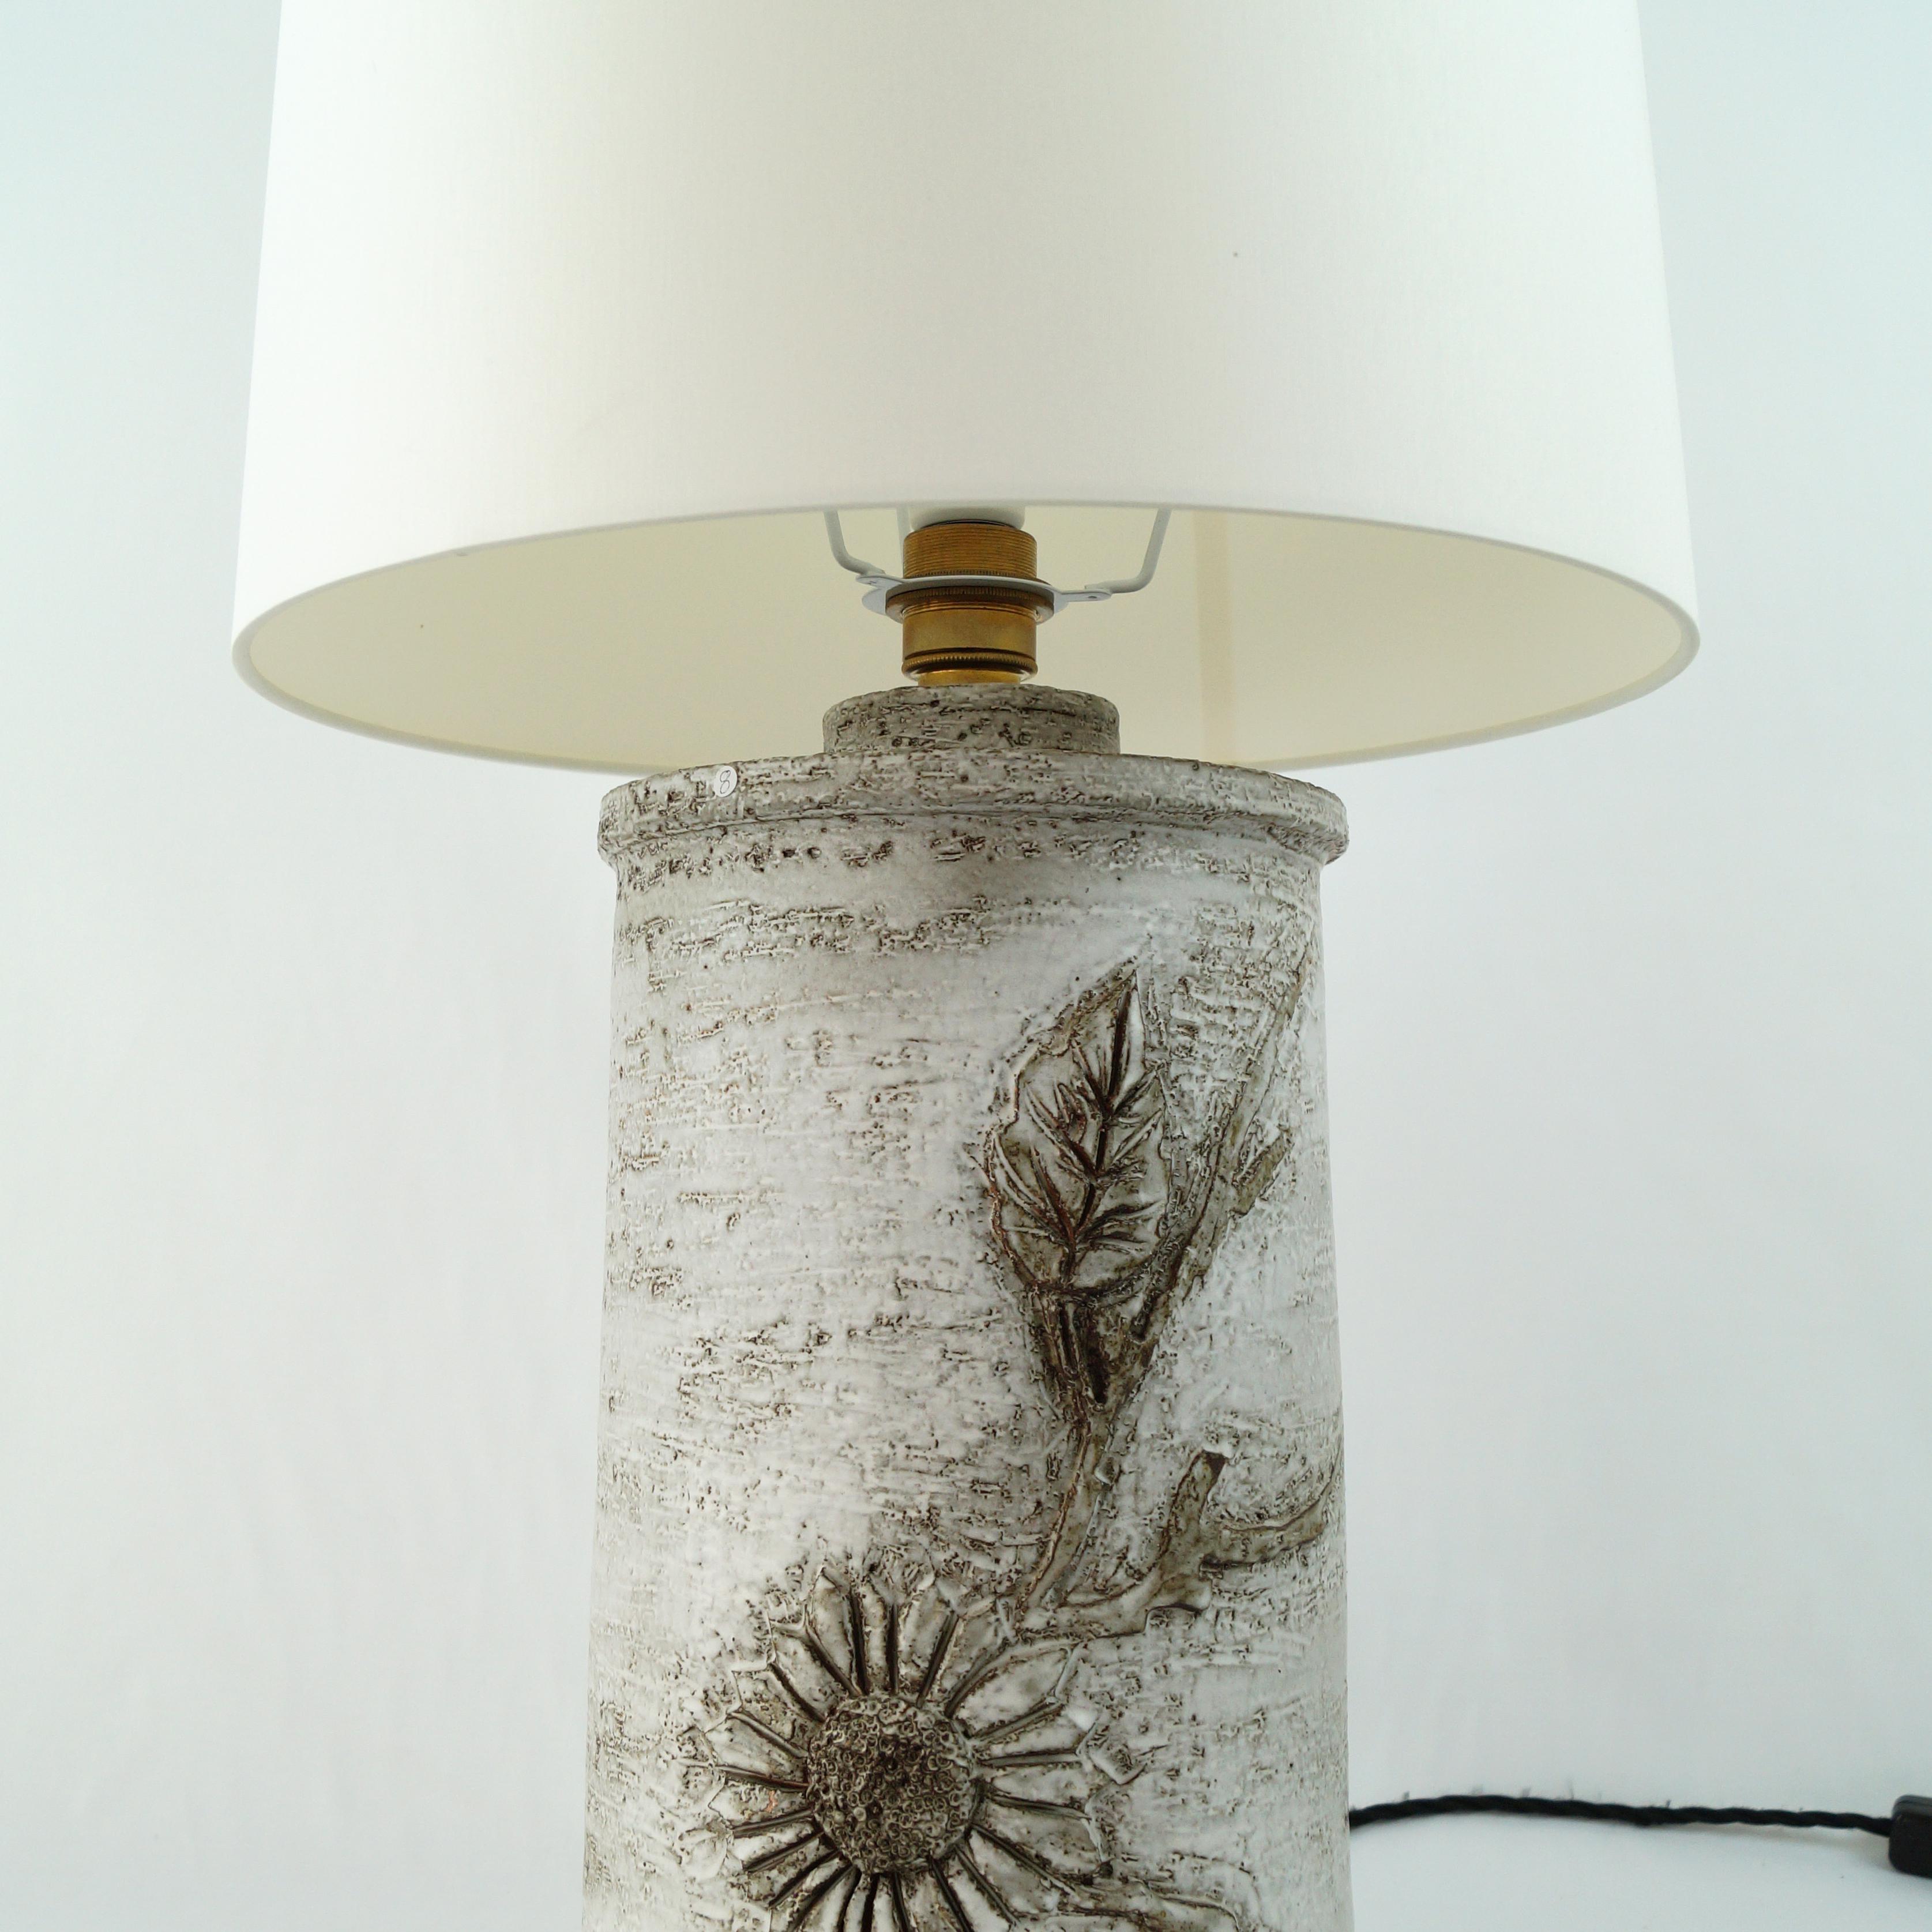 A rather large table lamp, handmade in white and grey ceramic decoration by Huguette Bessone, signed under the base H. Bessone, Vallauris. Depicting a sunflower. Unique piece. circa 1970. In very good condition, rewired with new electrical